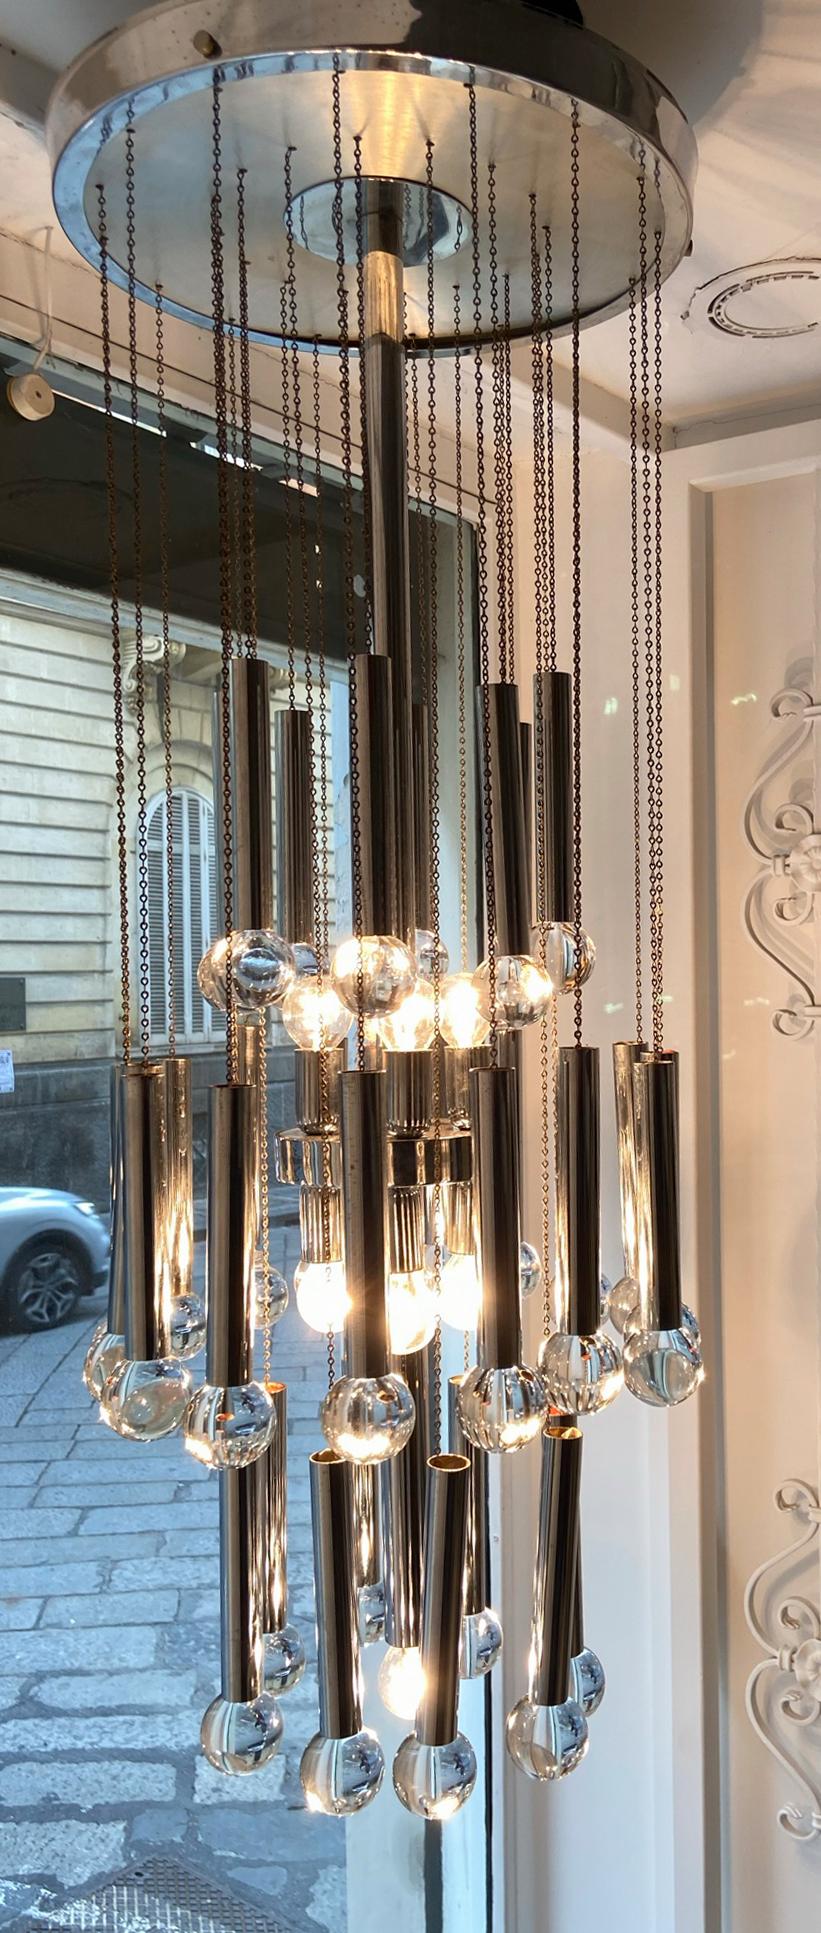 Chrome with chains and glass balls chandelier, circa 1970.
The center stem contains candelabra size sockets and is showed here with clear light bulb, blending in with the glass balls, creating a powerful explosion of reflection on the chrome tube